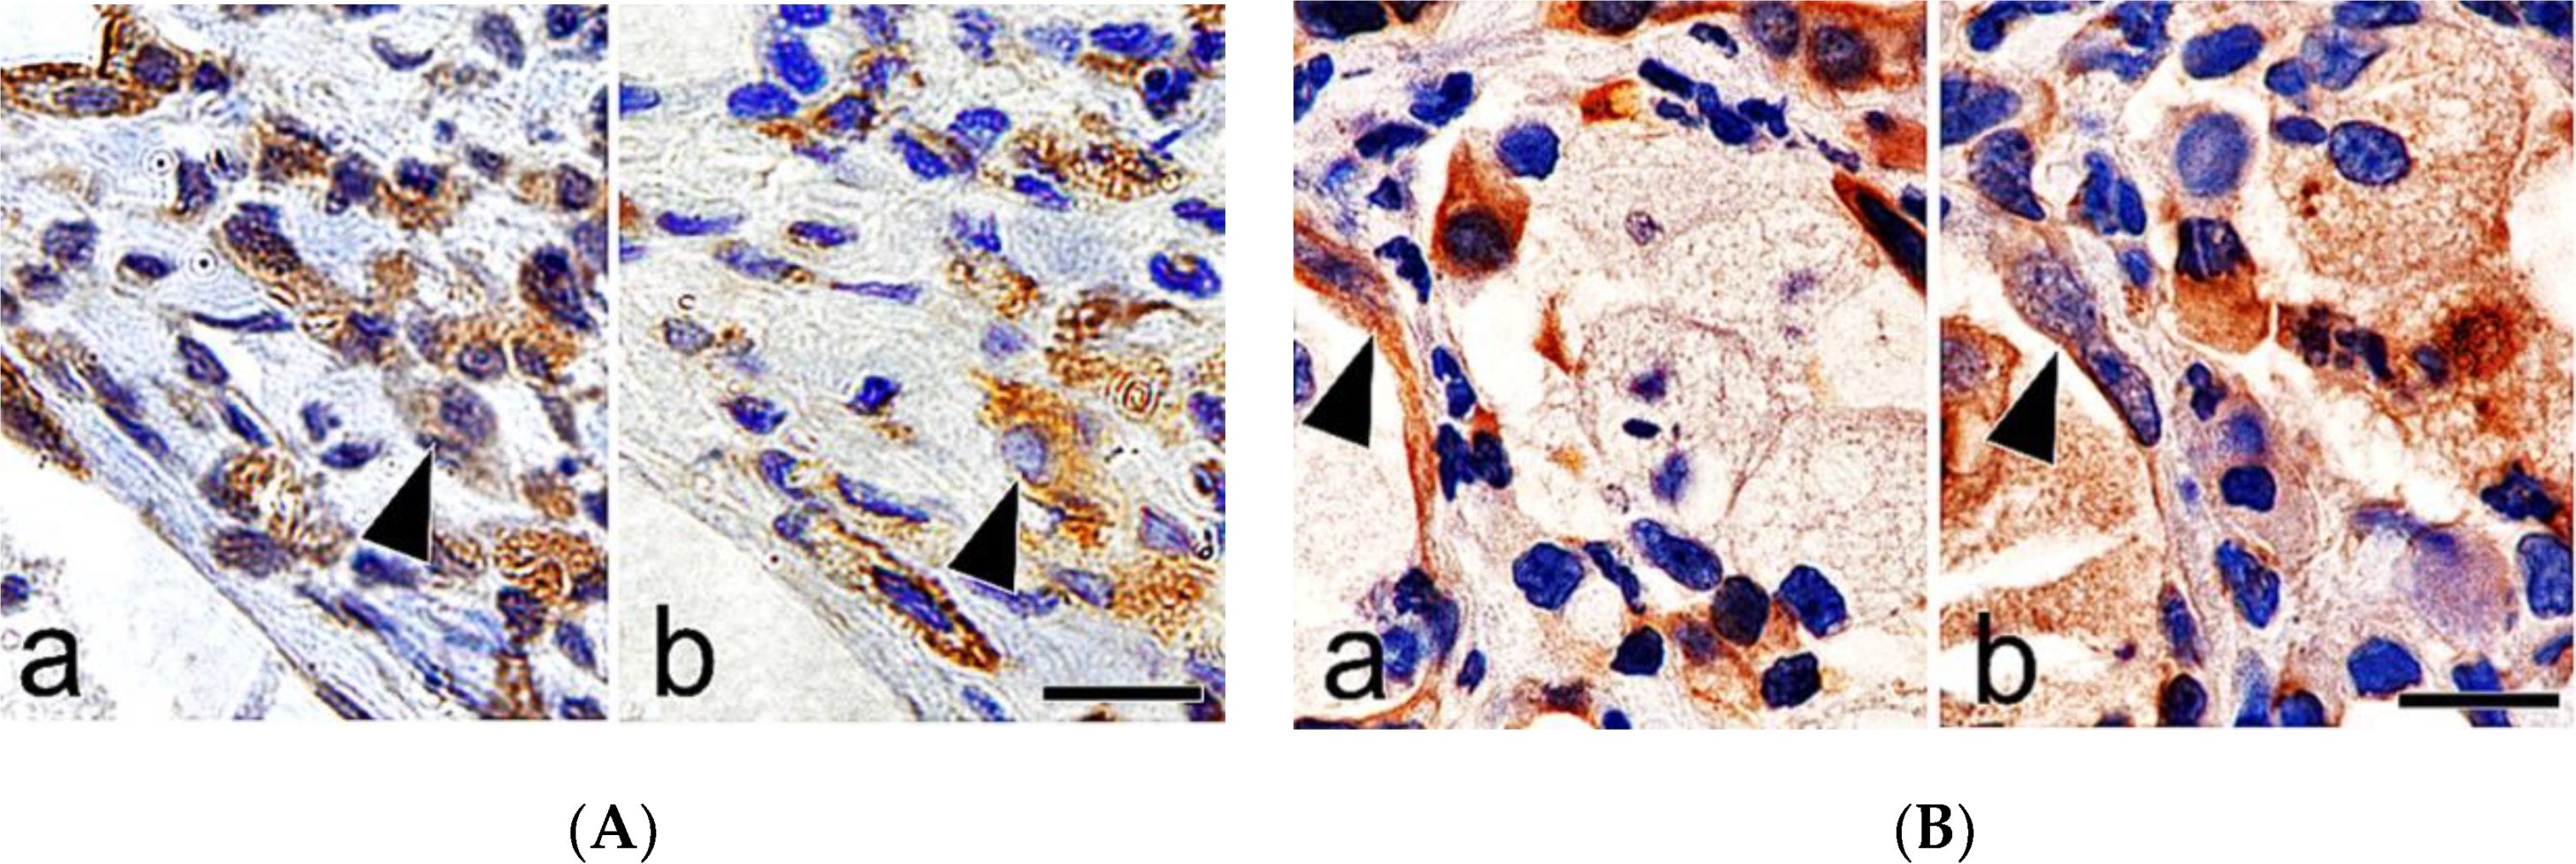 Pathological Study on Epithelial-Mesenchymal Transition in Silicotic Lung Lesions in Rat.